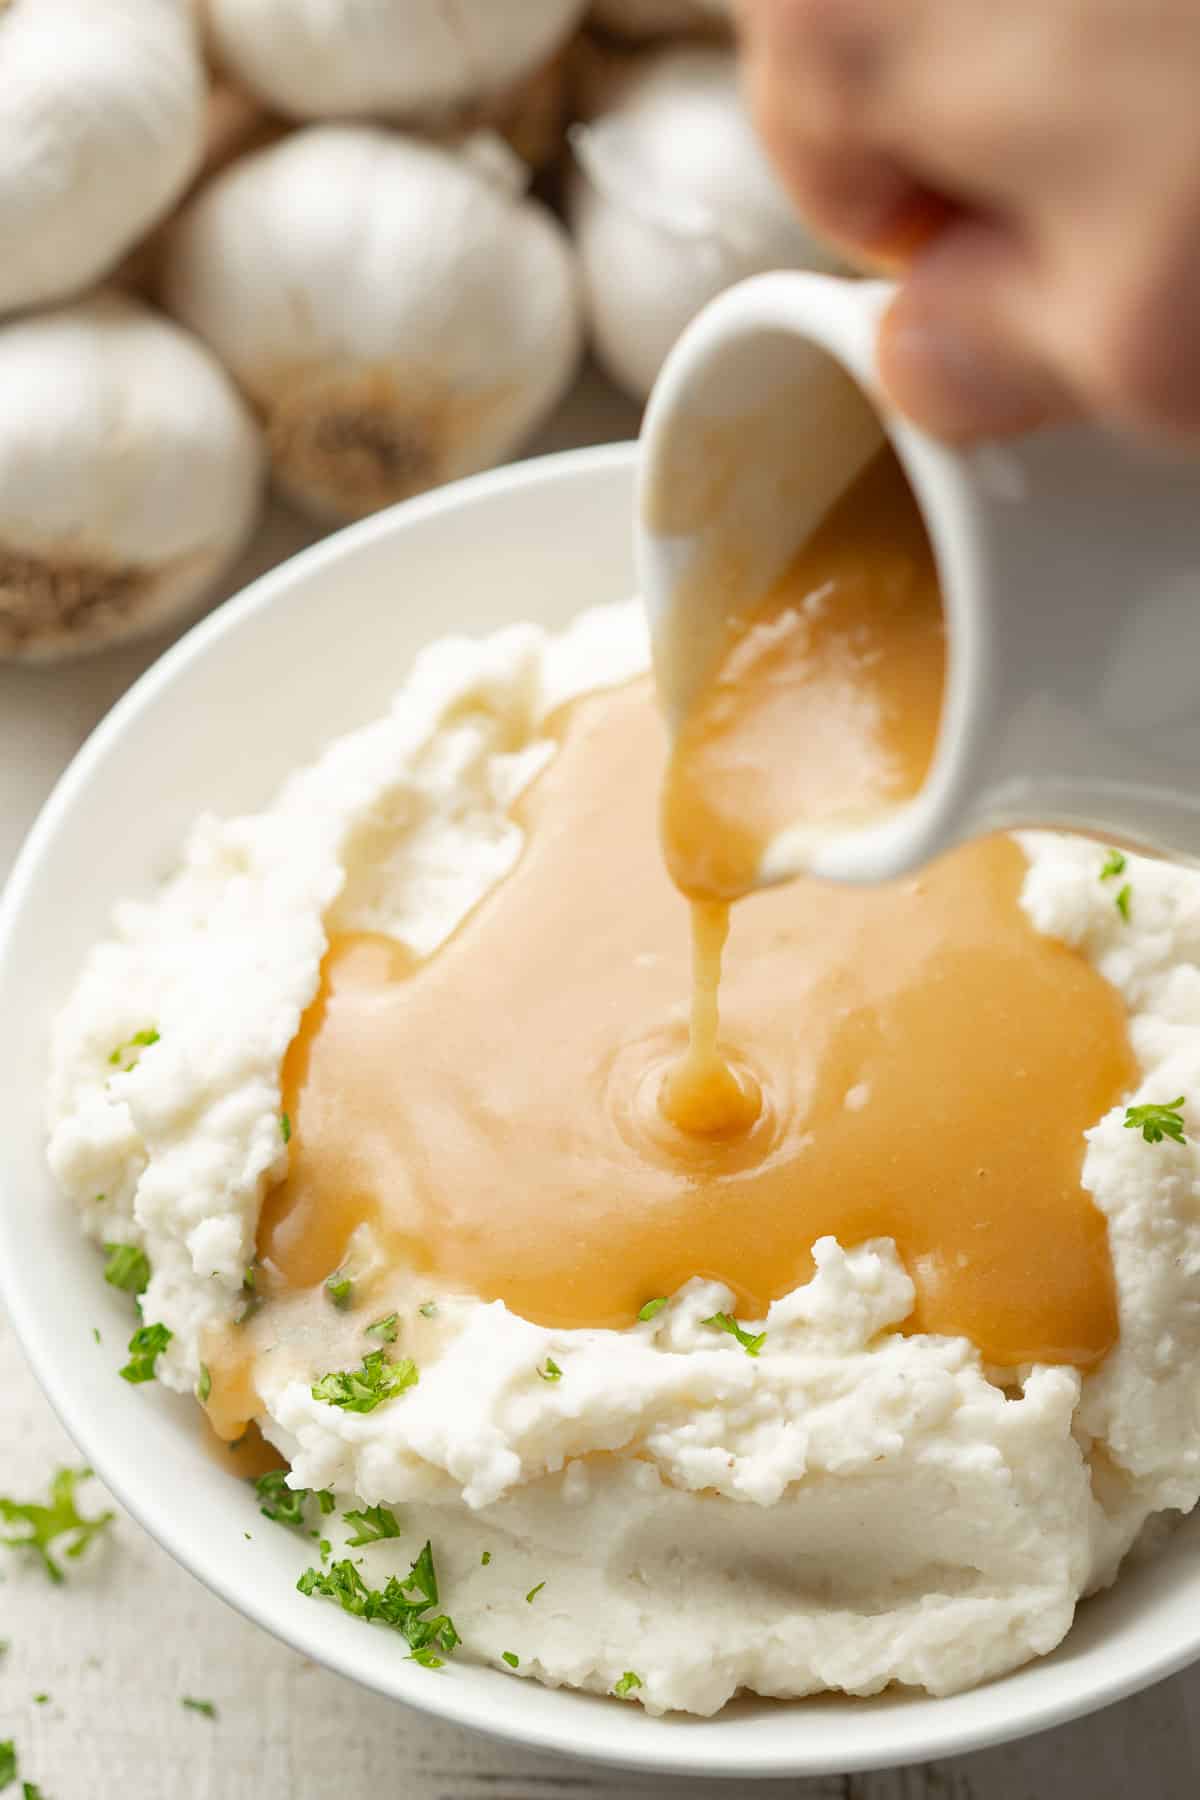 Hand pouring gravy over a bowl of mashed potatoes.